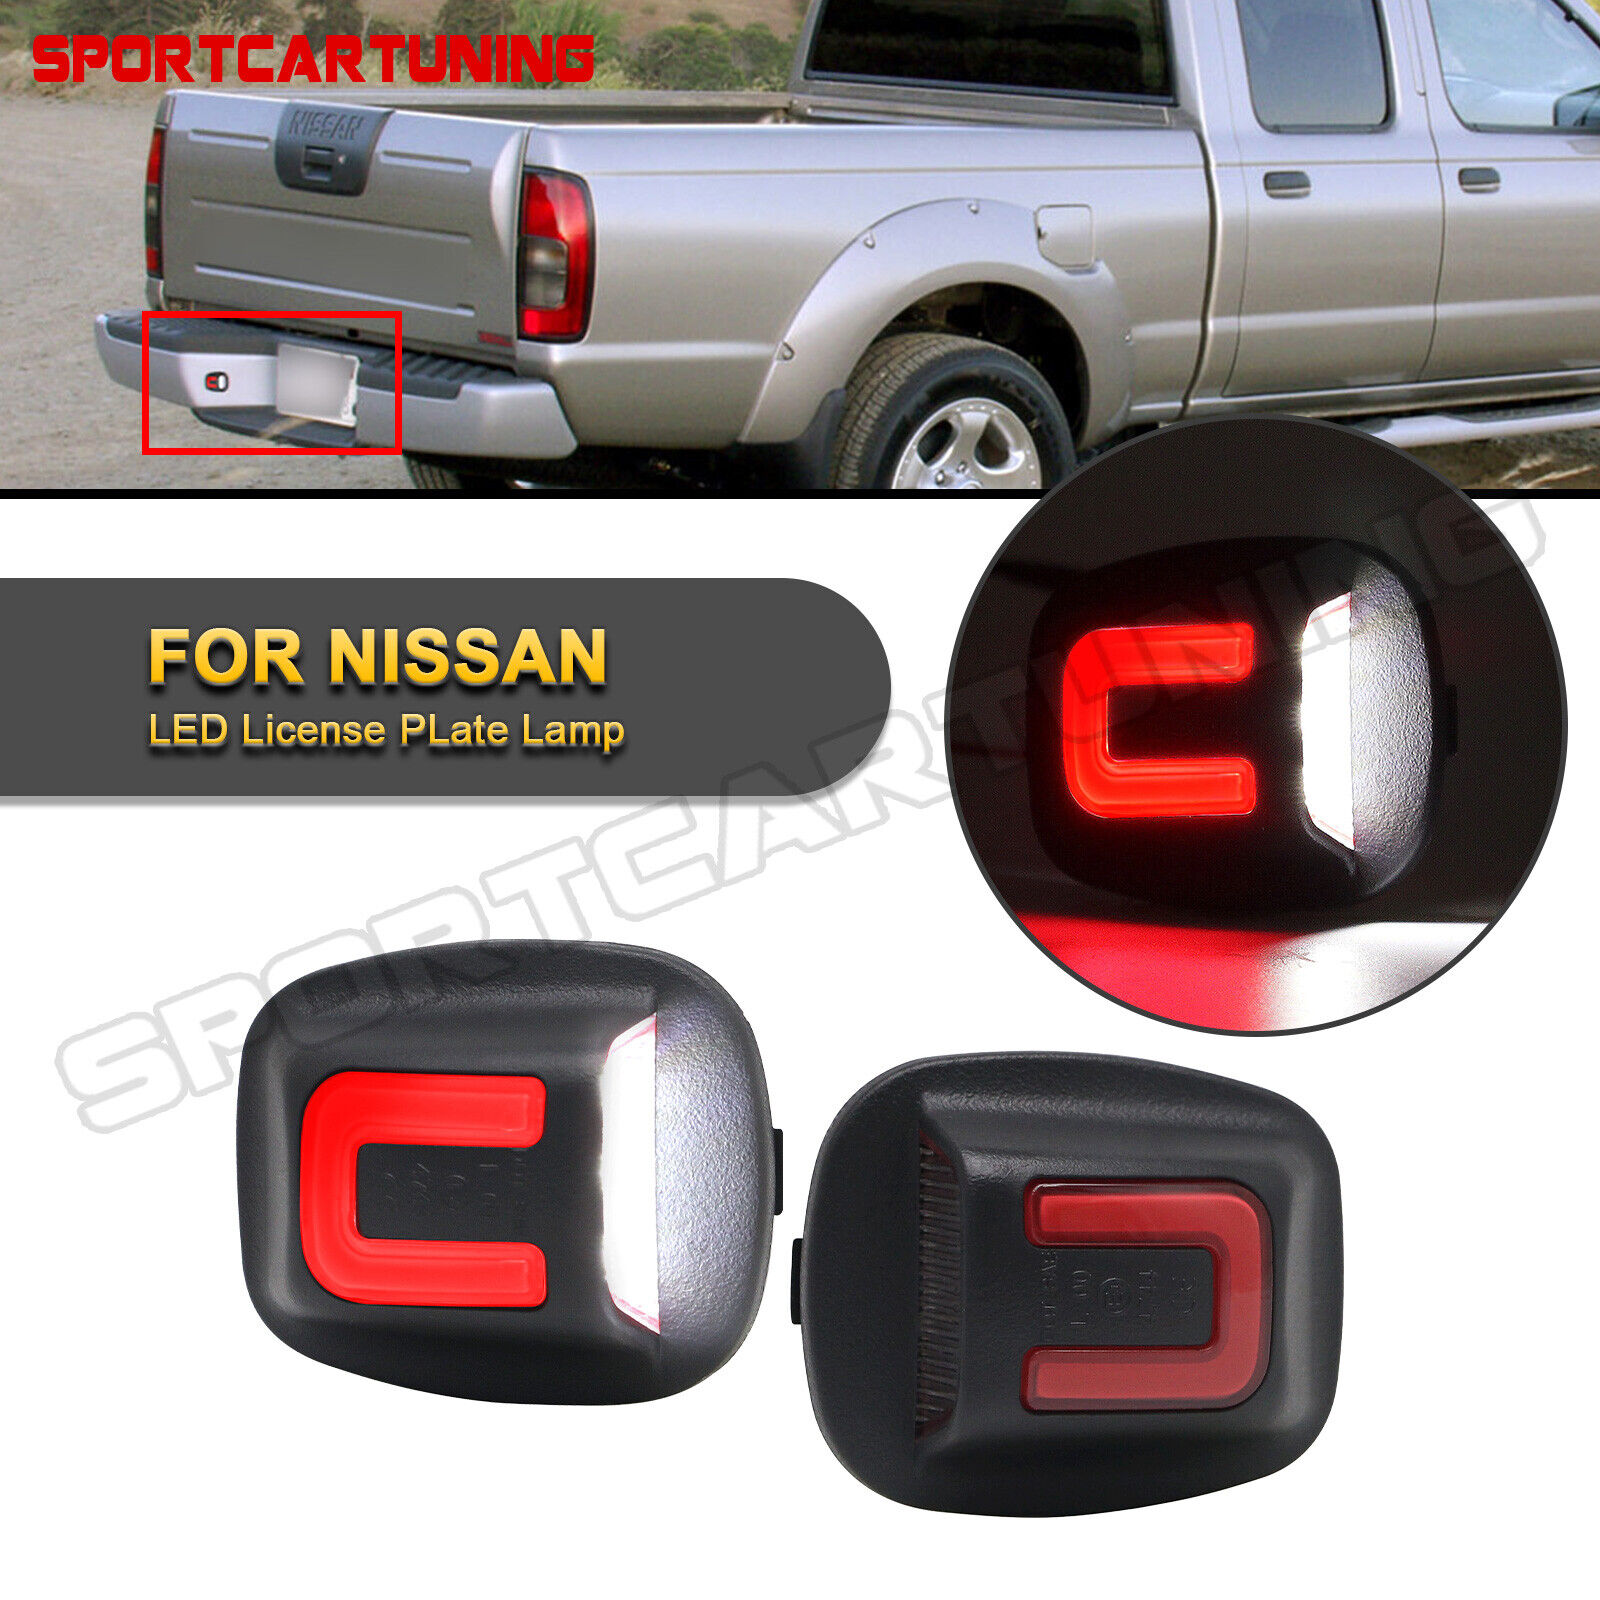 White & Red LED License Plate Lights Lamp For 98-04 Nissan Frontier 94-04 Xterra